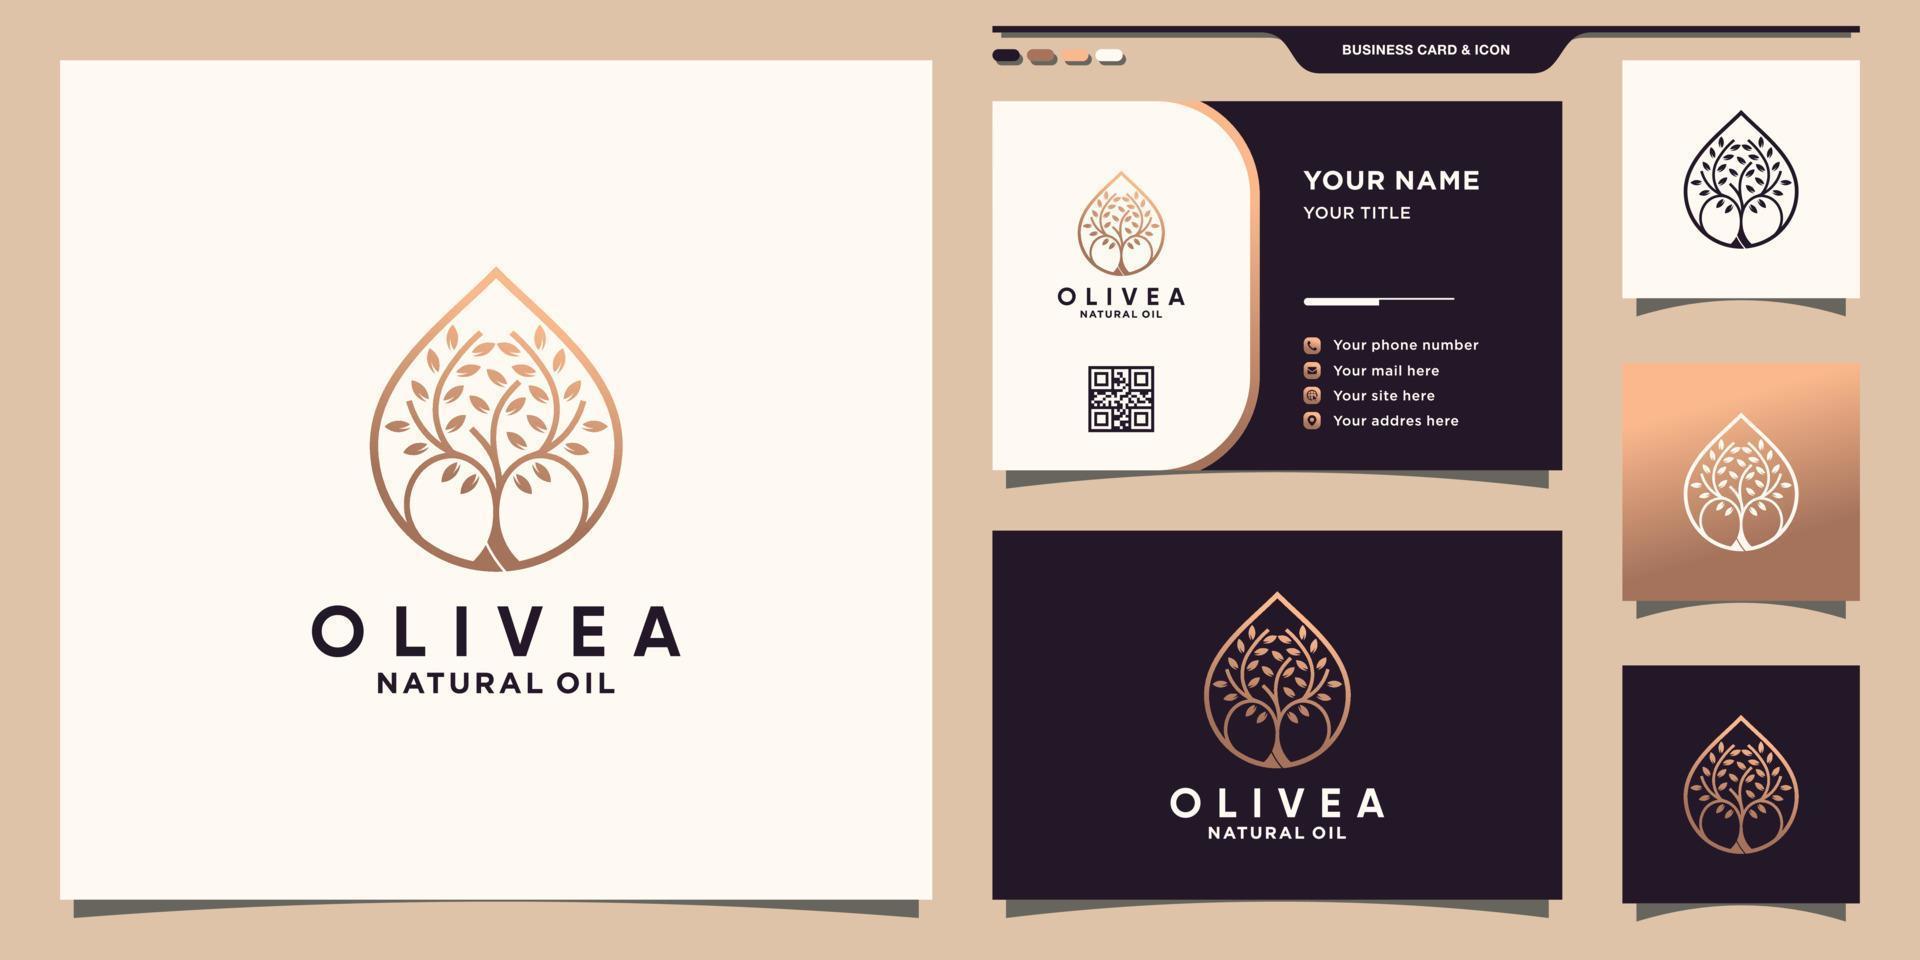 Olive tree logo and water drop icon with line art style and business card design Premium Vector